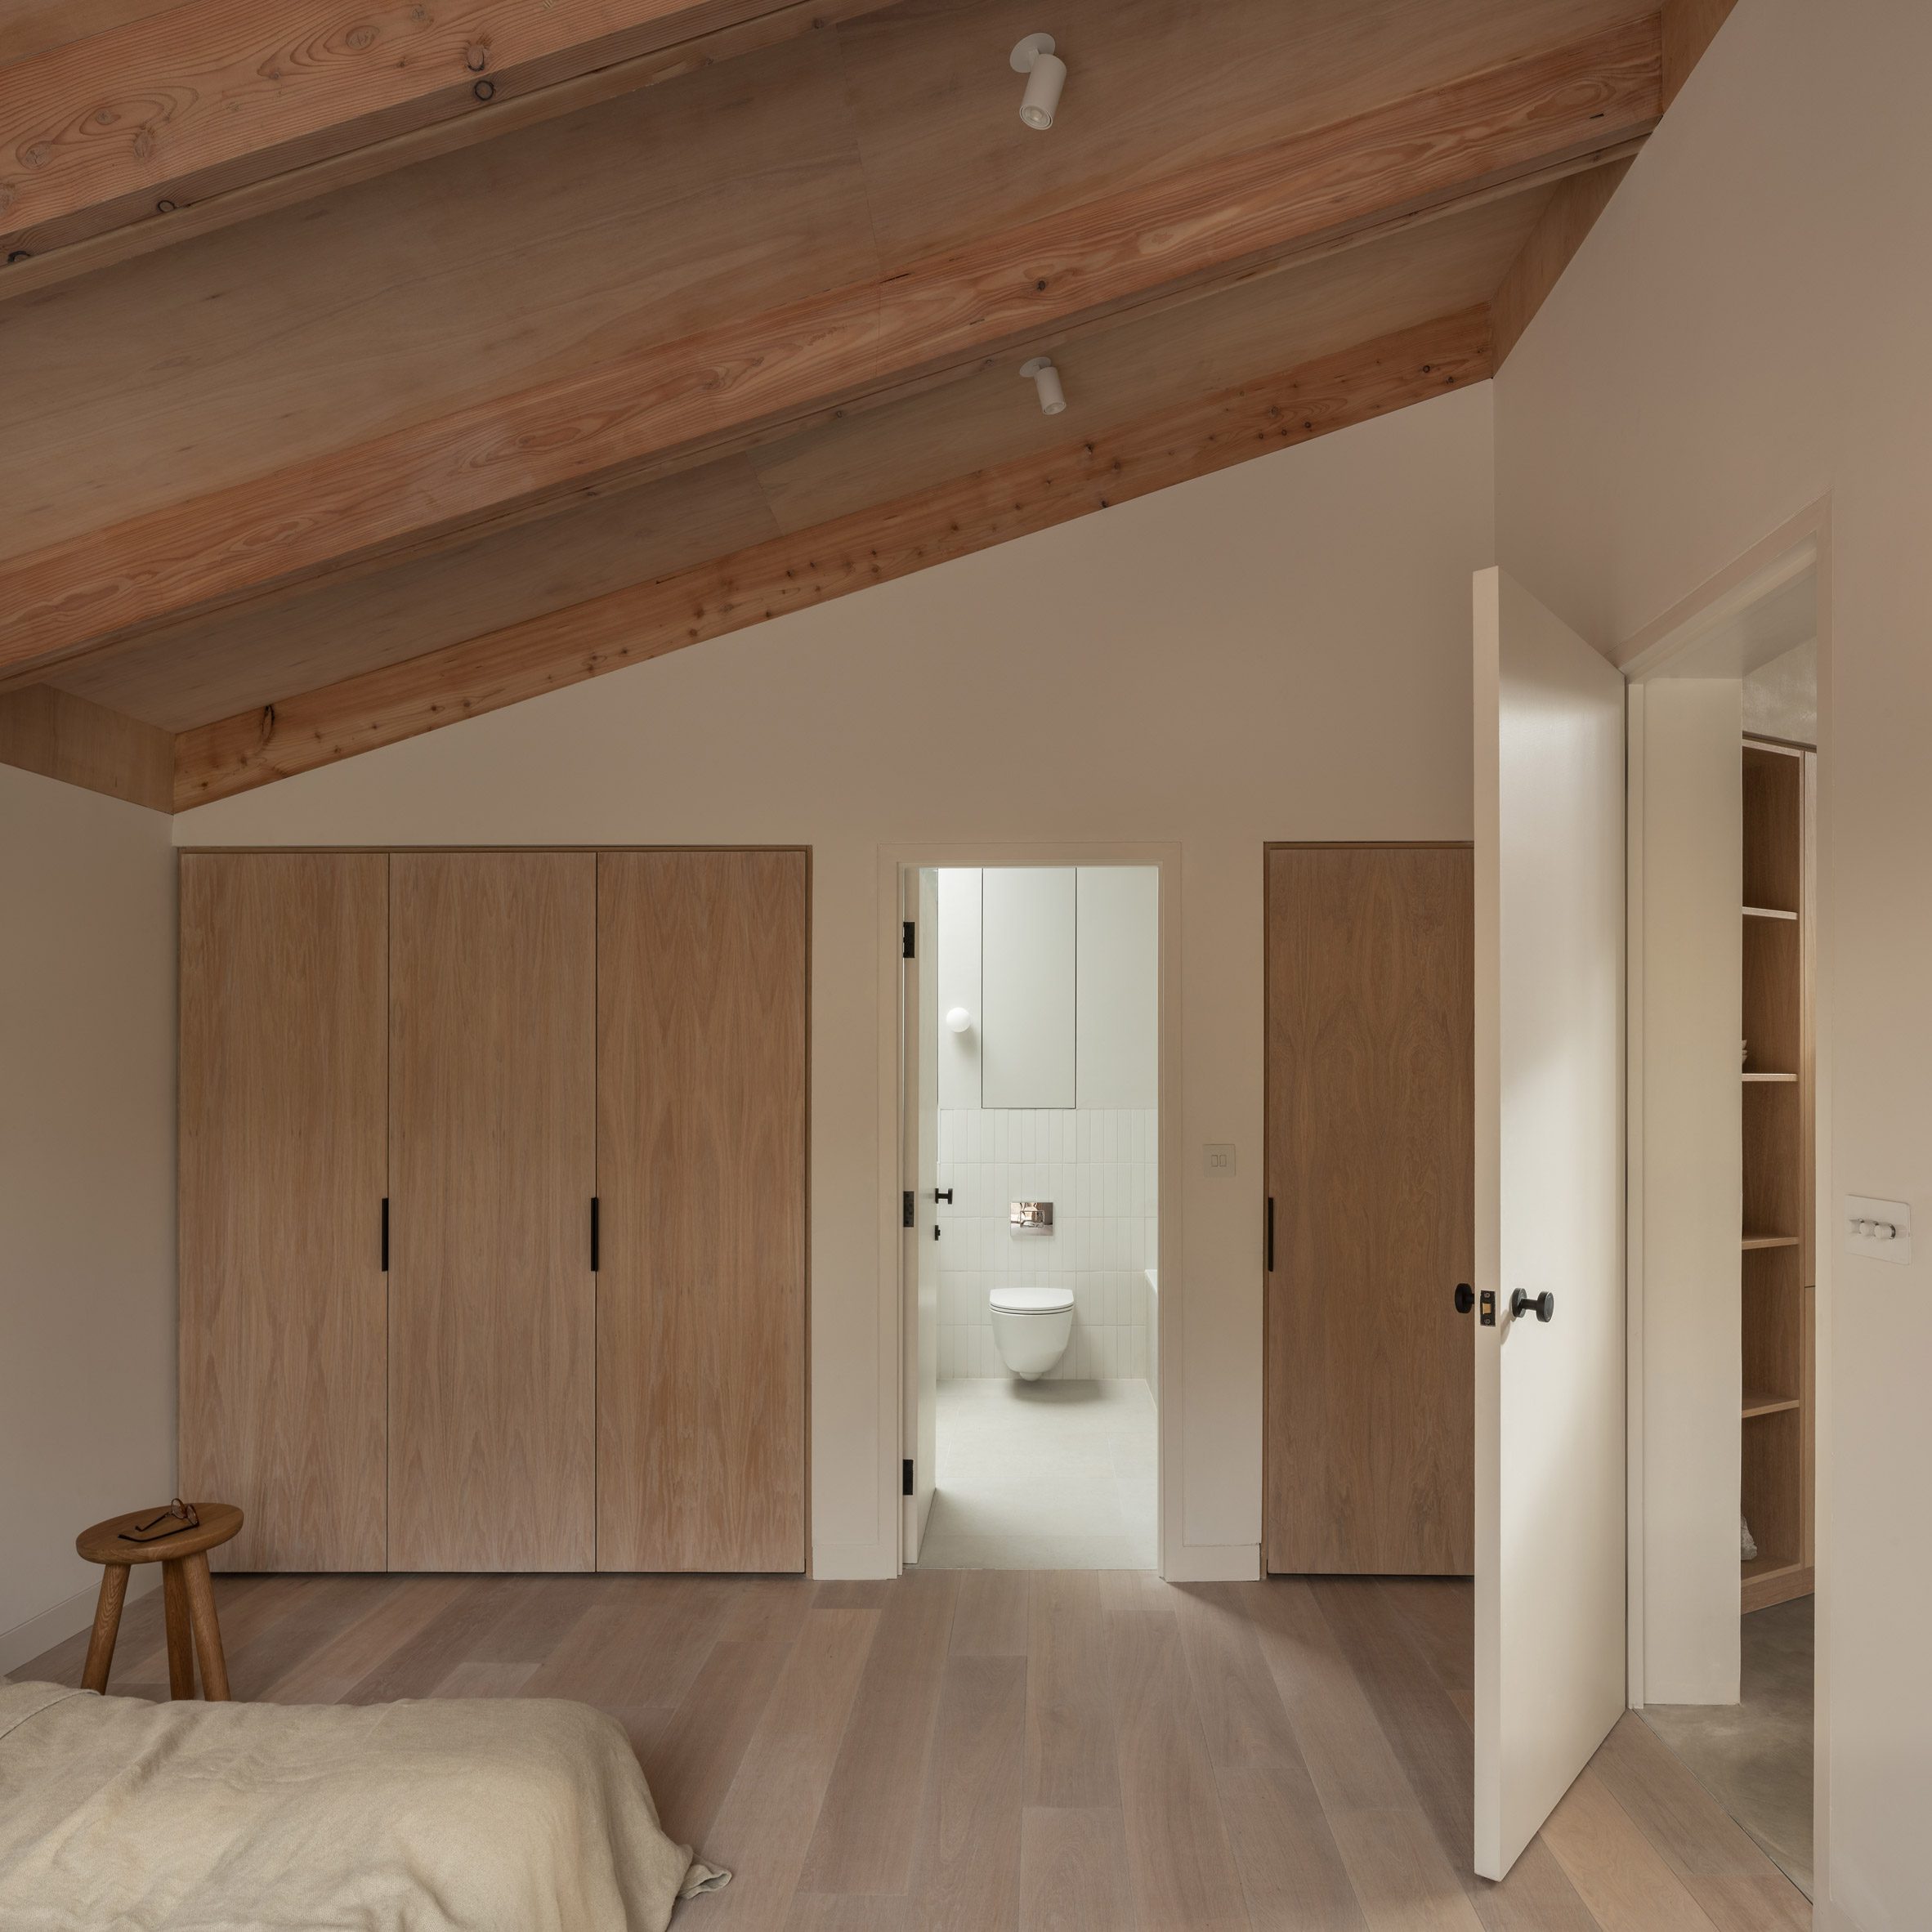 Bedroom suite inside Butterfly House by Oliver Leech Architects